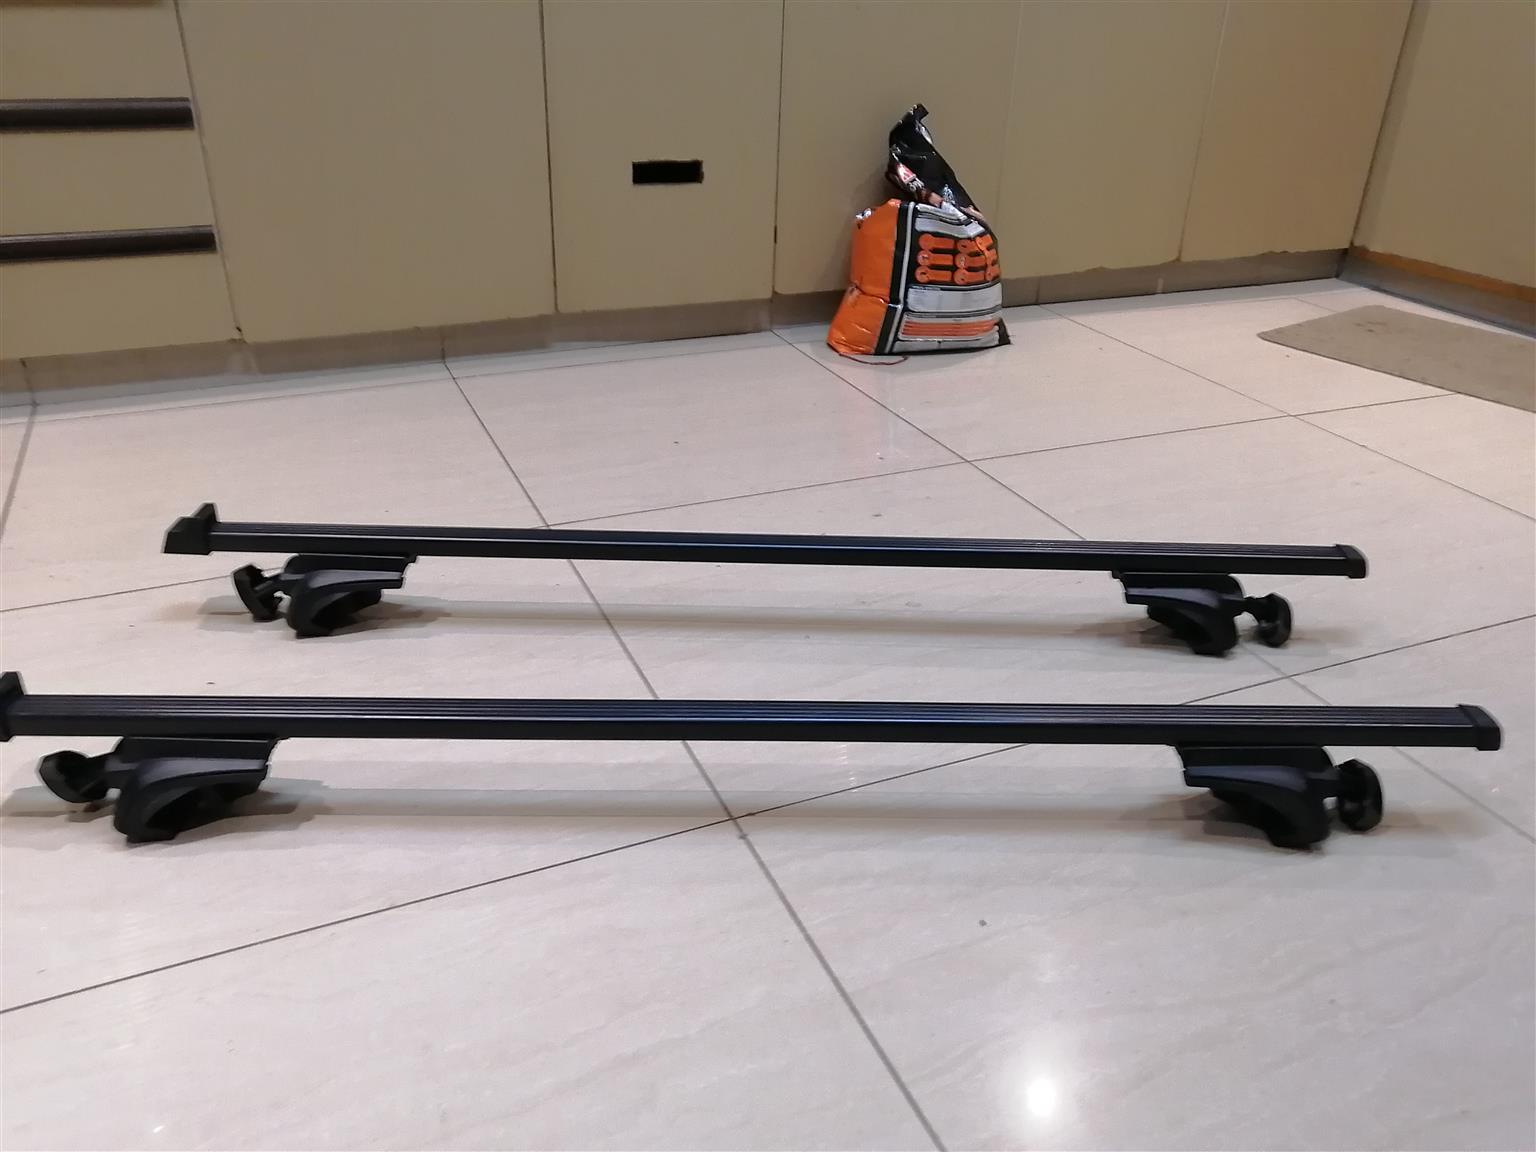 THULE ROOF RACKS GOOD AS BRAND NEW,  ONLY USED ON VEHICLE FOR 2 MONTHS.